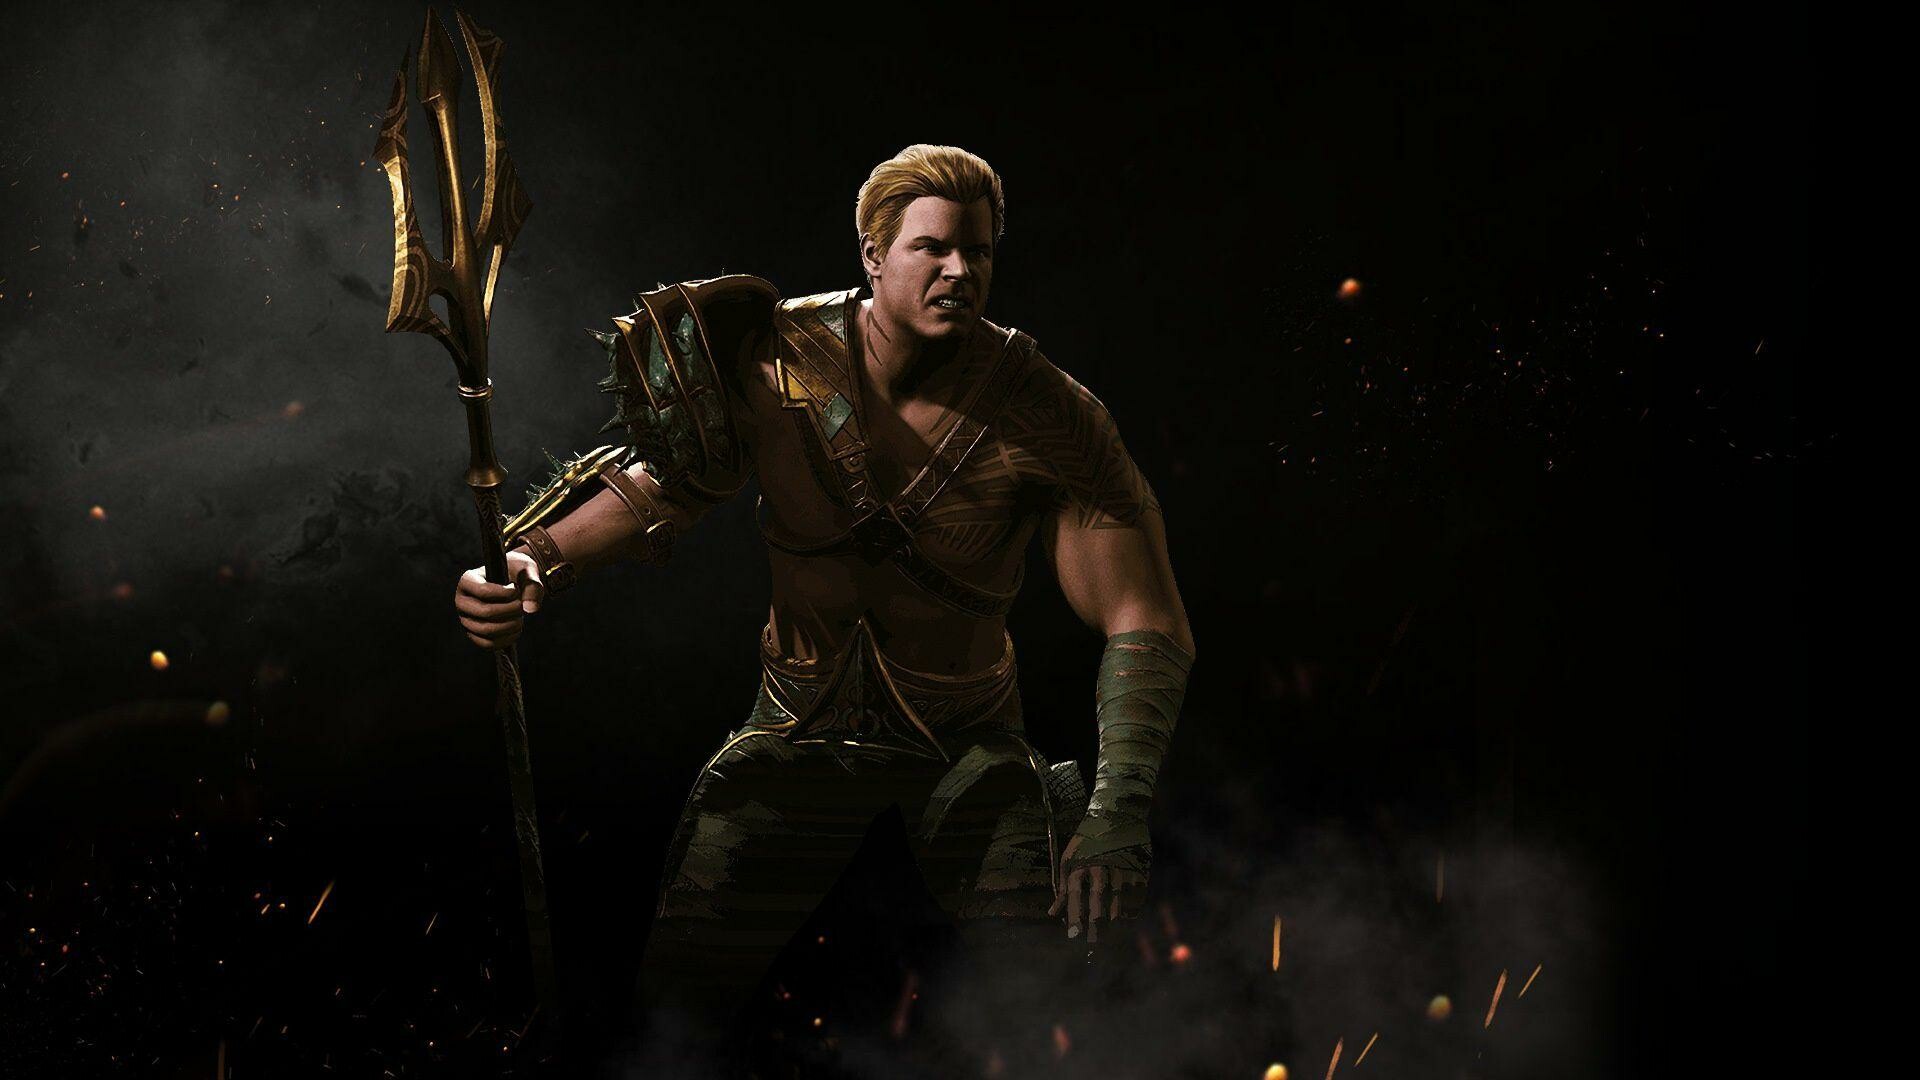 Injustice: Aquaman, A playable character and major antagonist in the game. 1920x1080 Full HD Wallpaper.